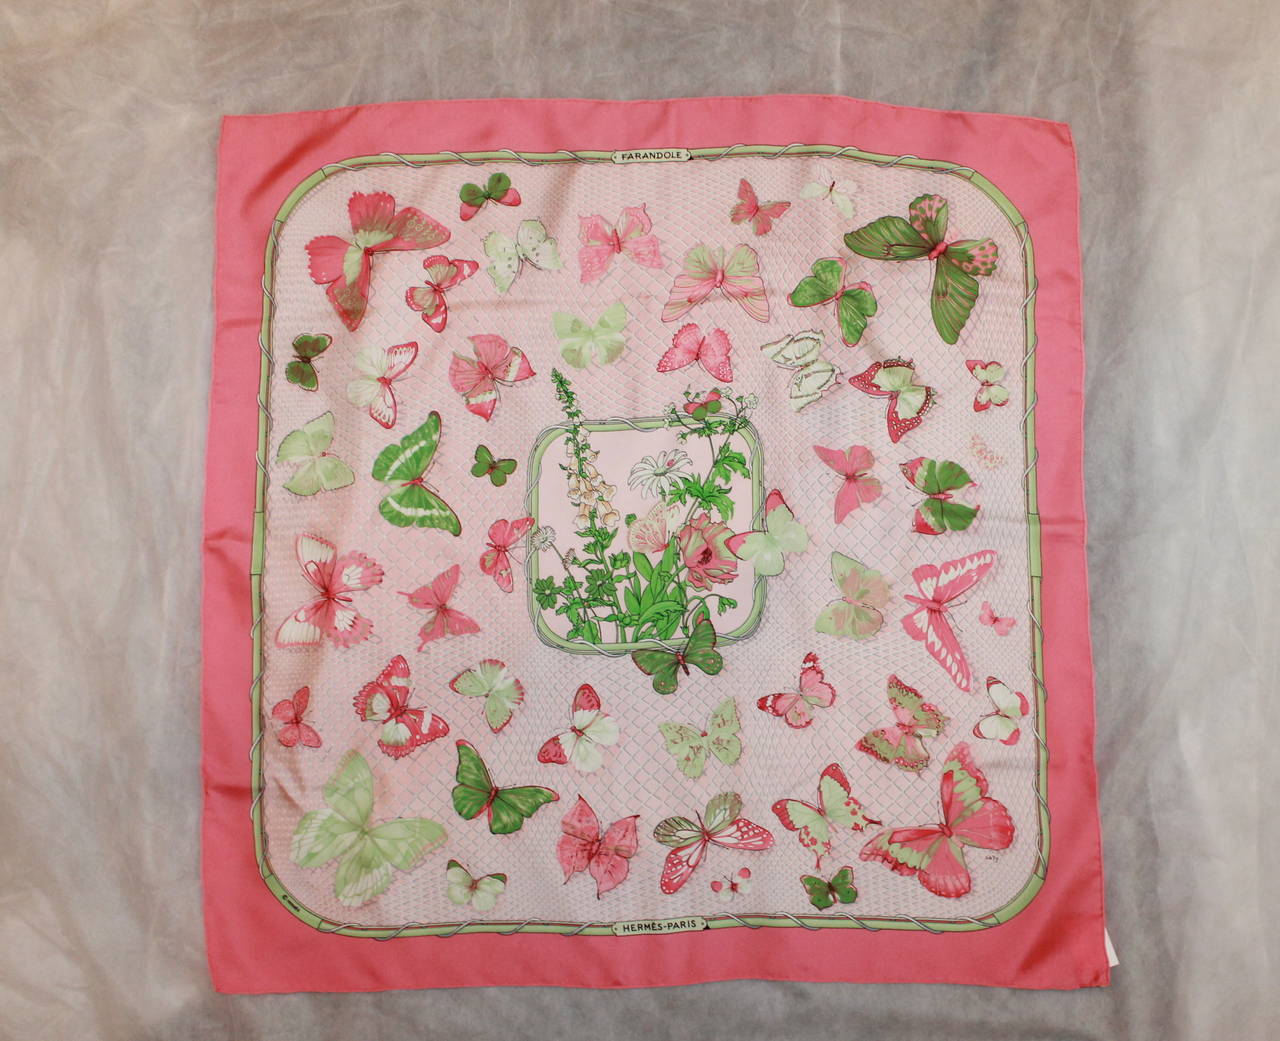 Hermes Pink and Green Butterfly Print Scarf in Very Good Condition.

Measurements:
34.75